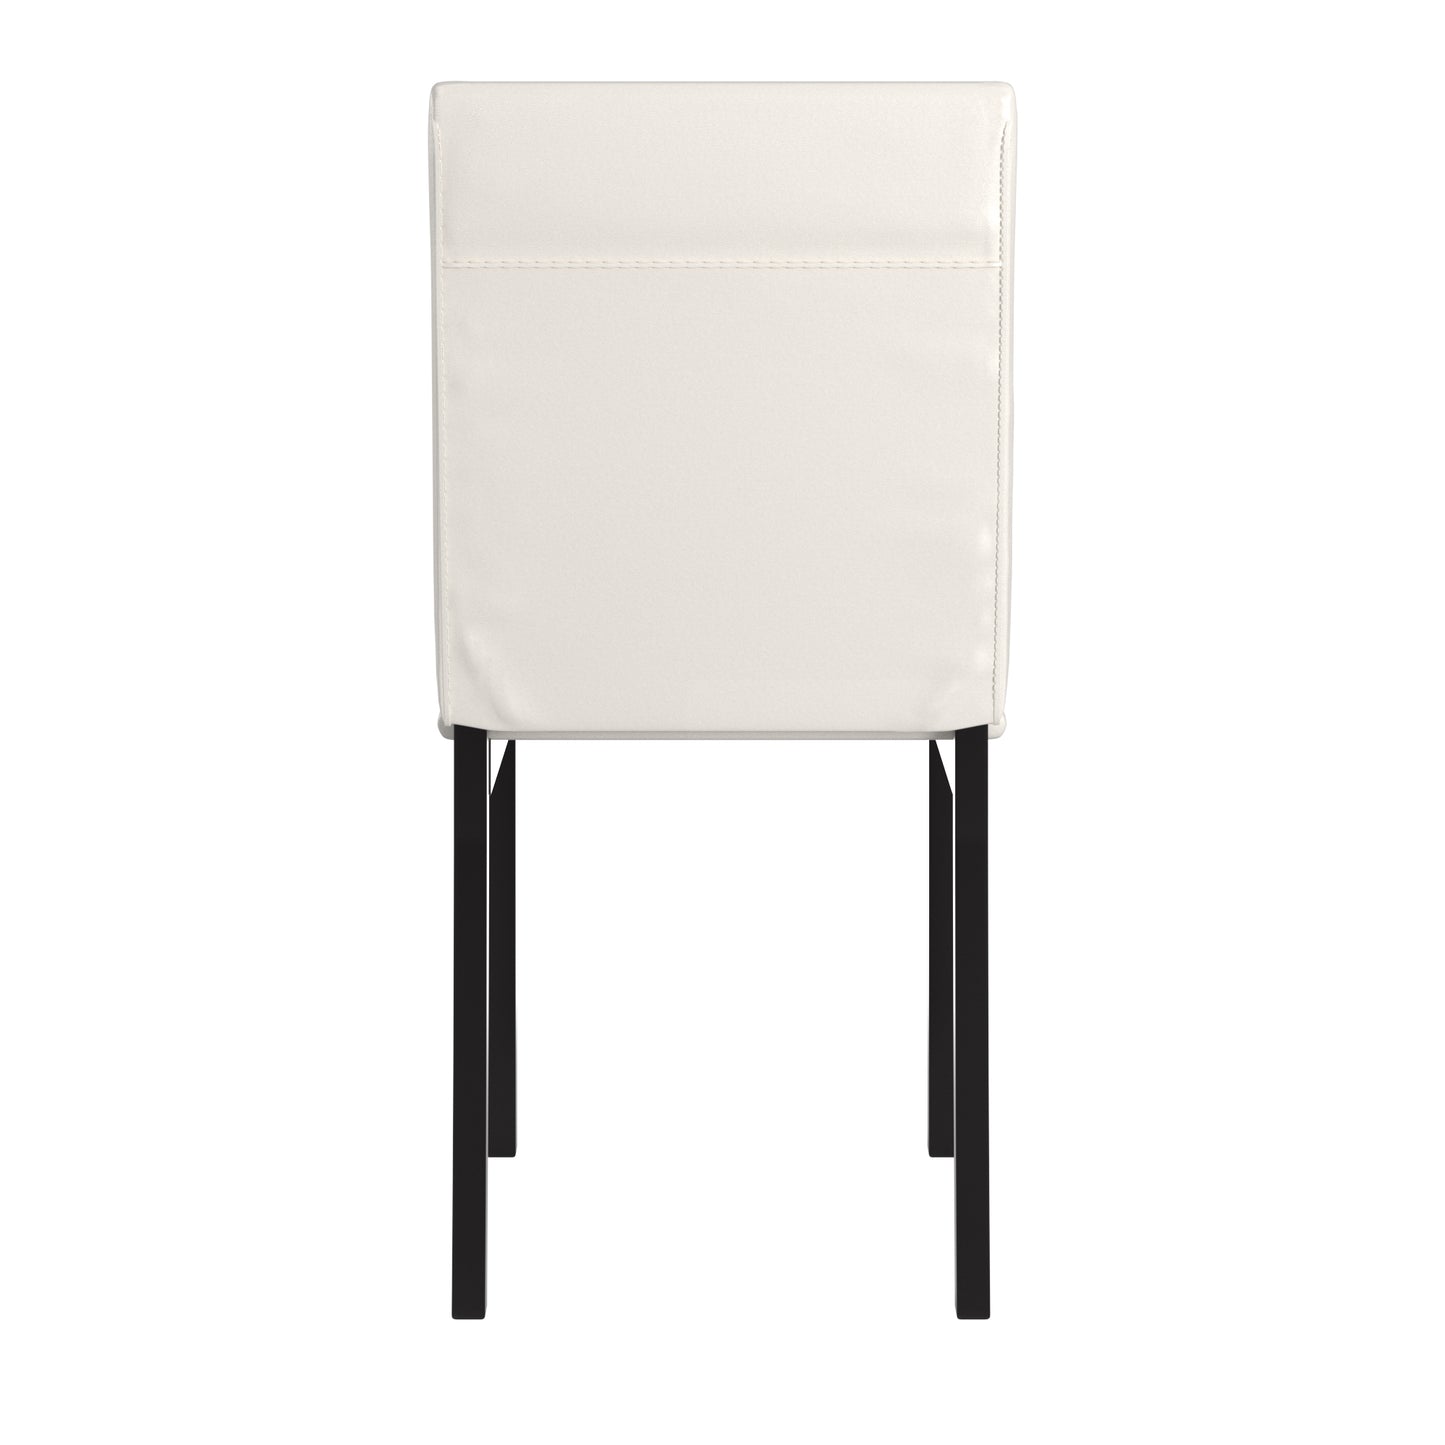 Metal Upholstered Dining Chairs - White Faux Leather, Set of 4